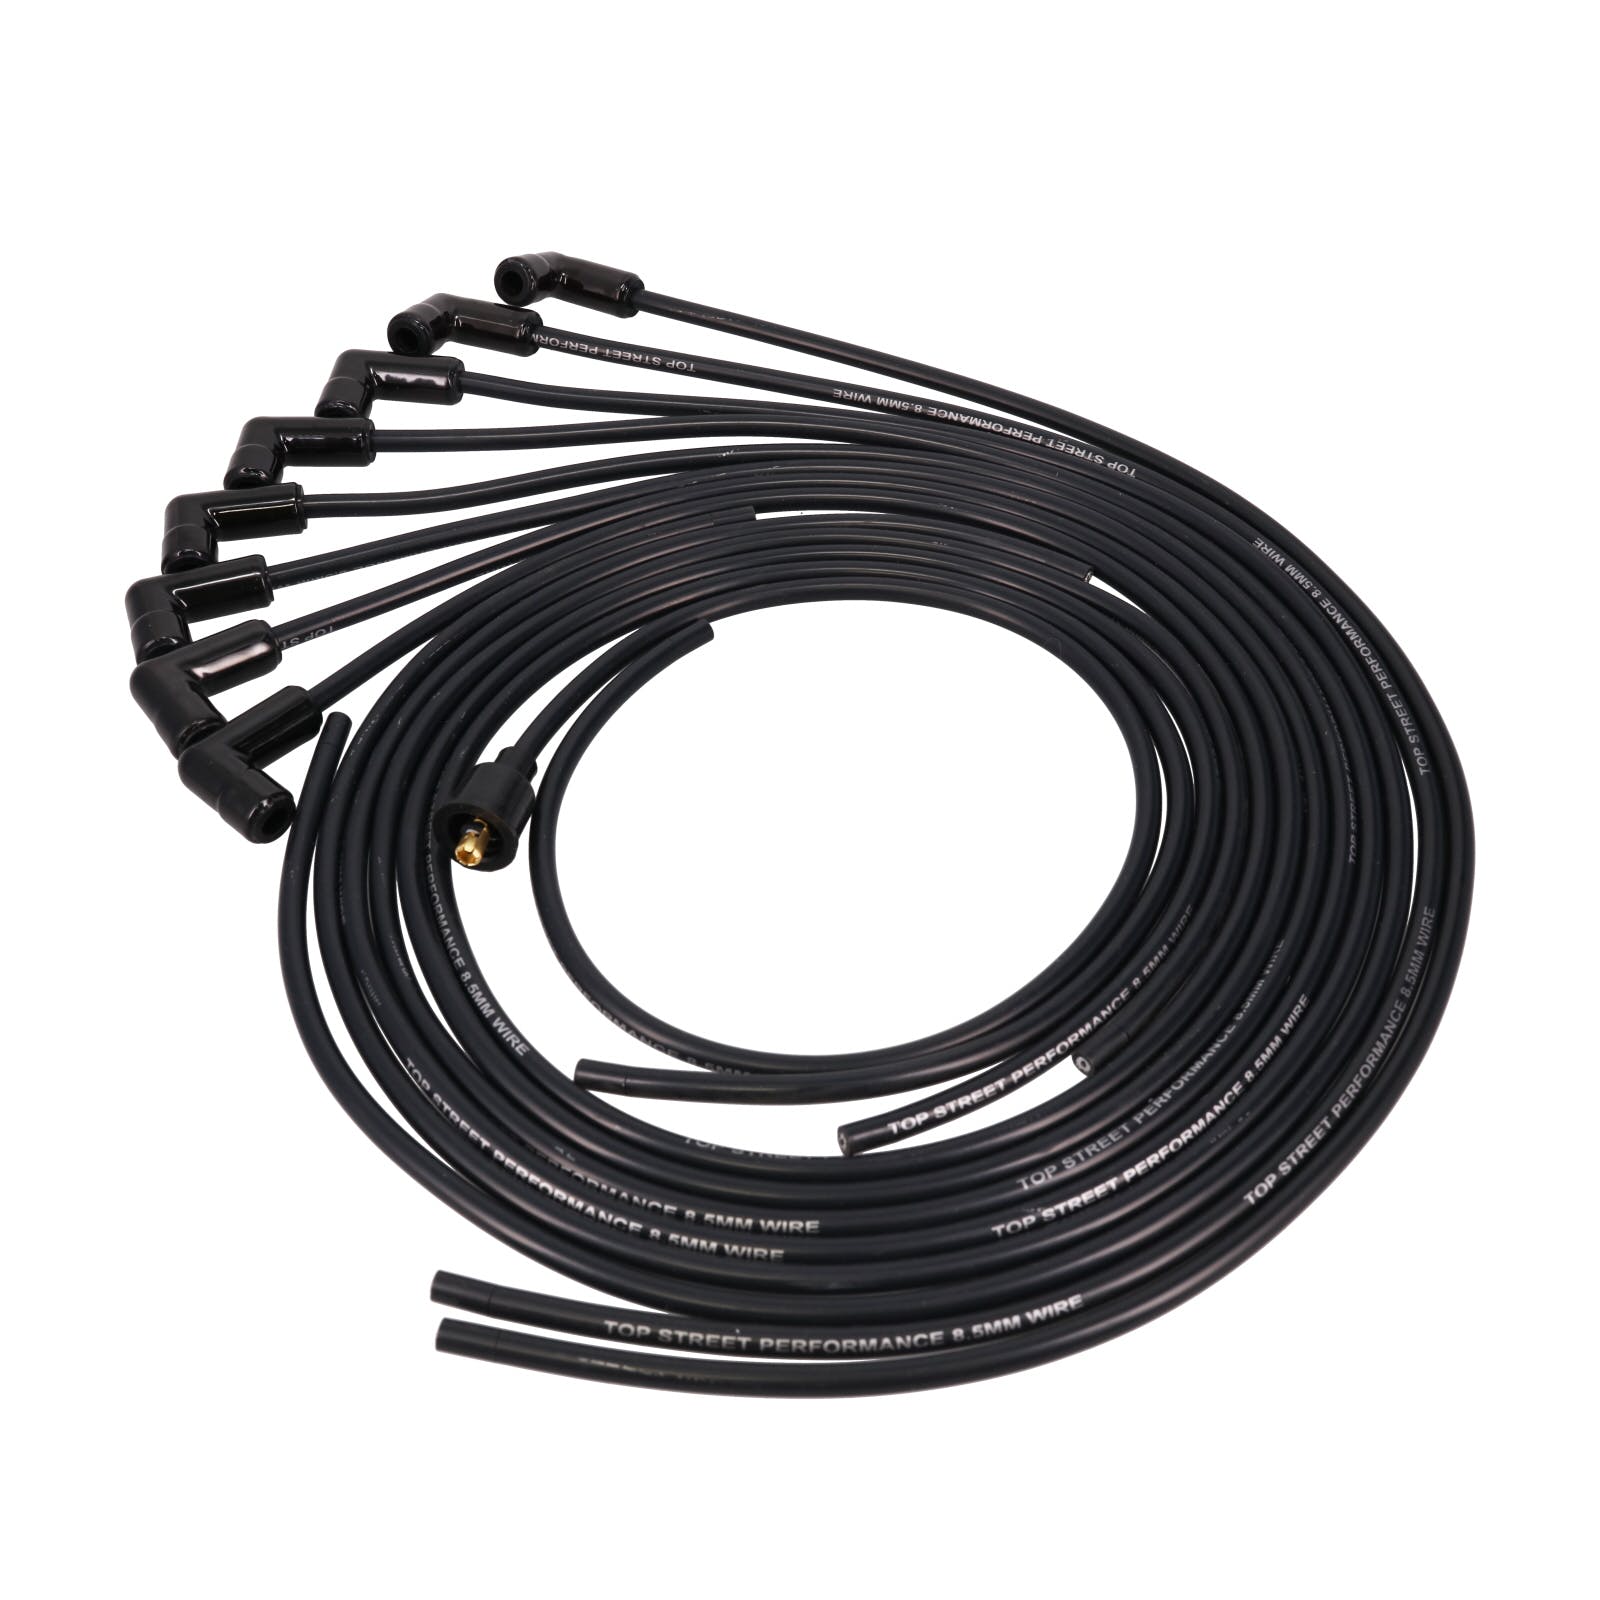 Top Street Performance 85090 Spark Plug Wire Set, Universal Fit 8.5mm with 90 degree Plug Boots, Black